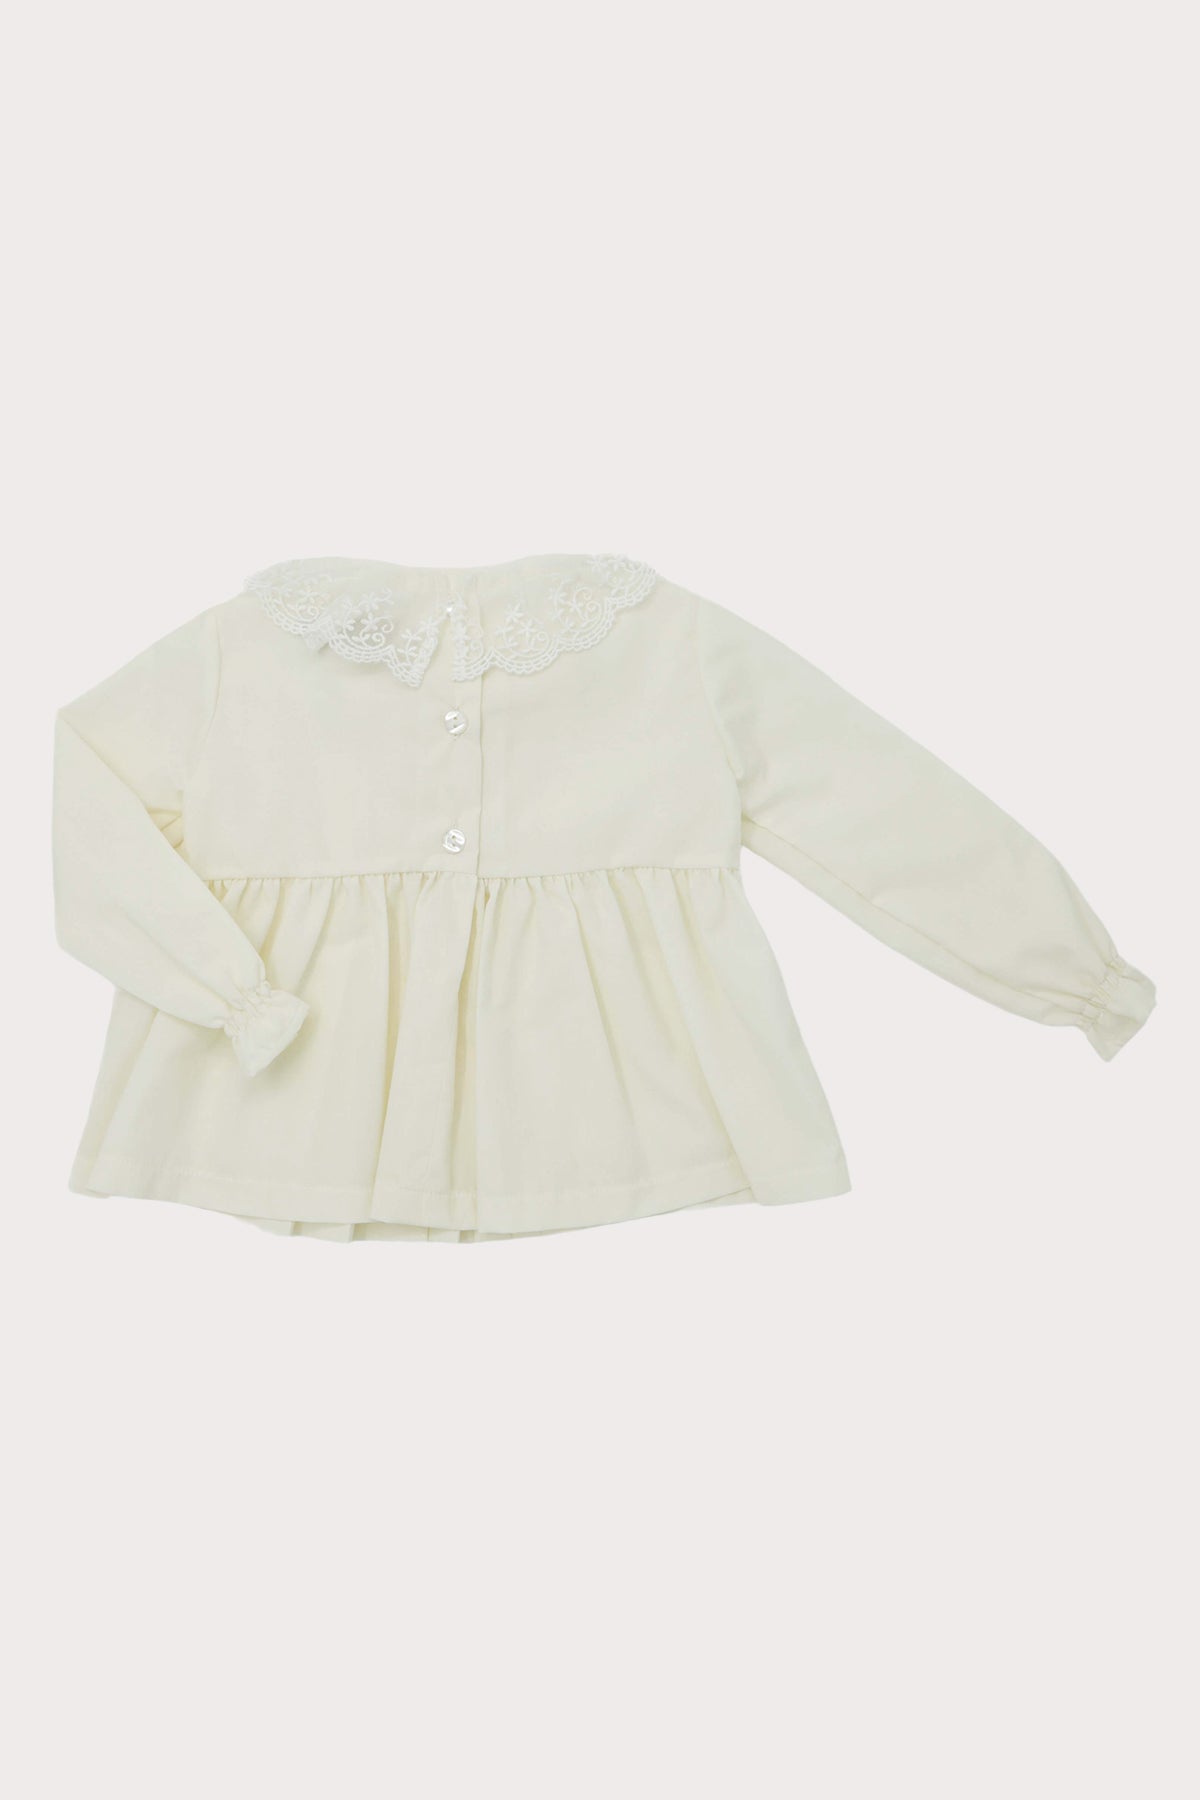 back of ivory lace collar girls blouse